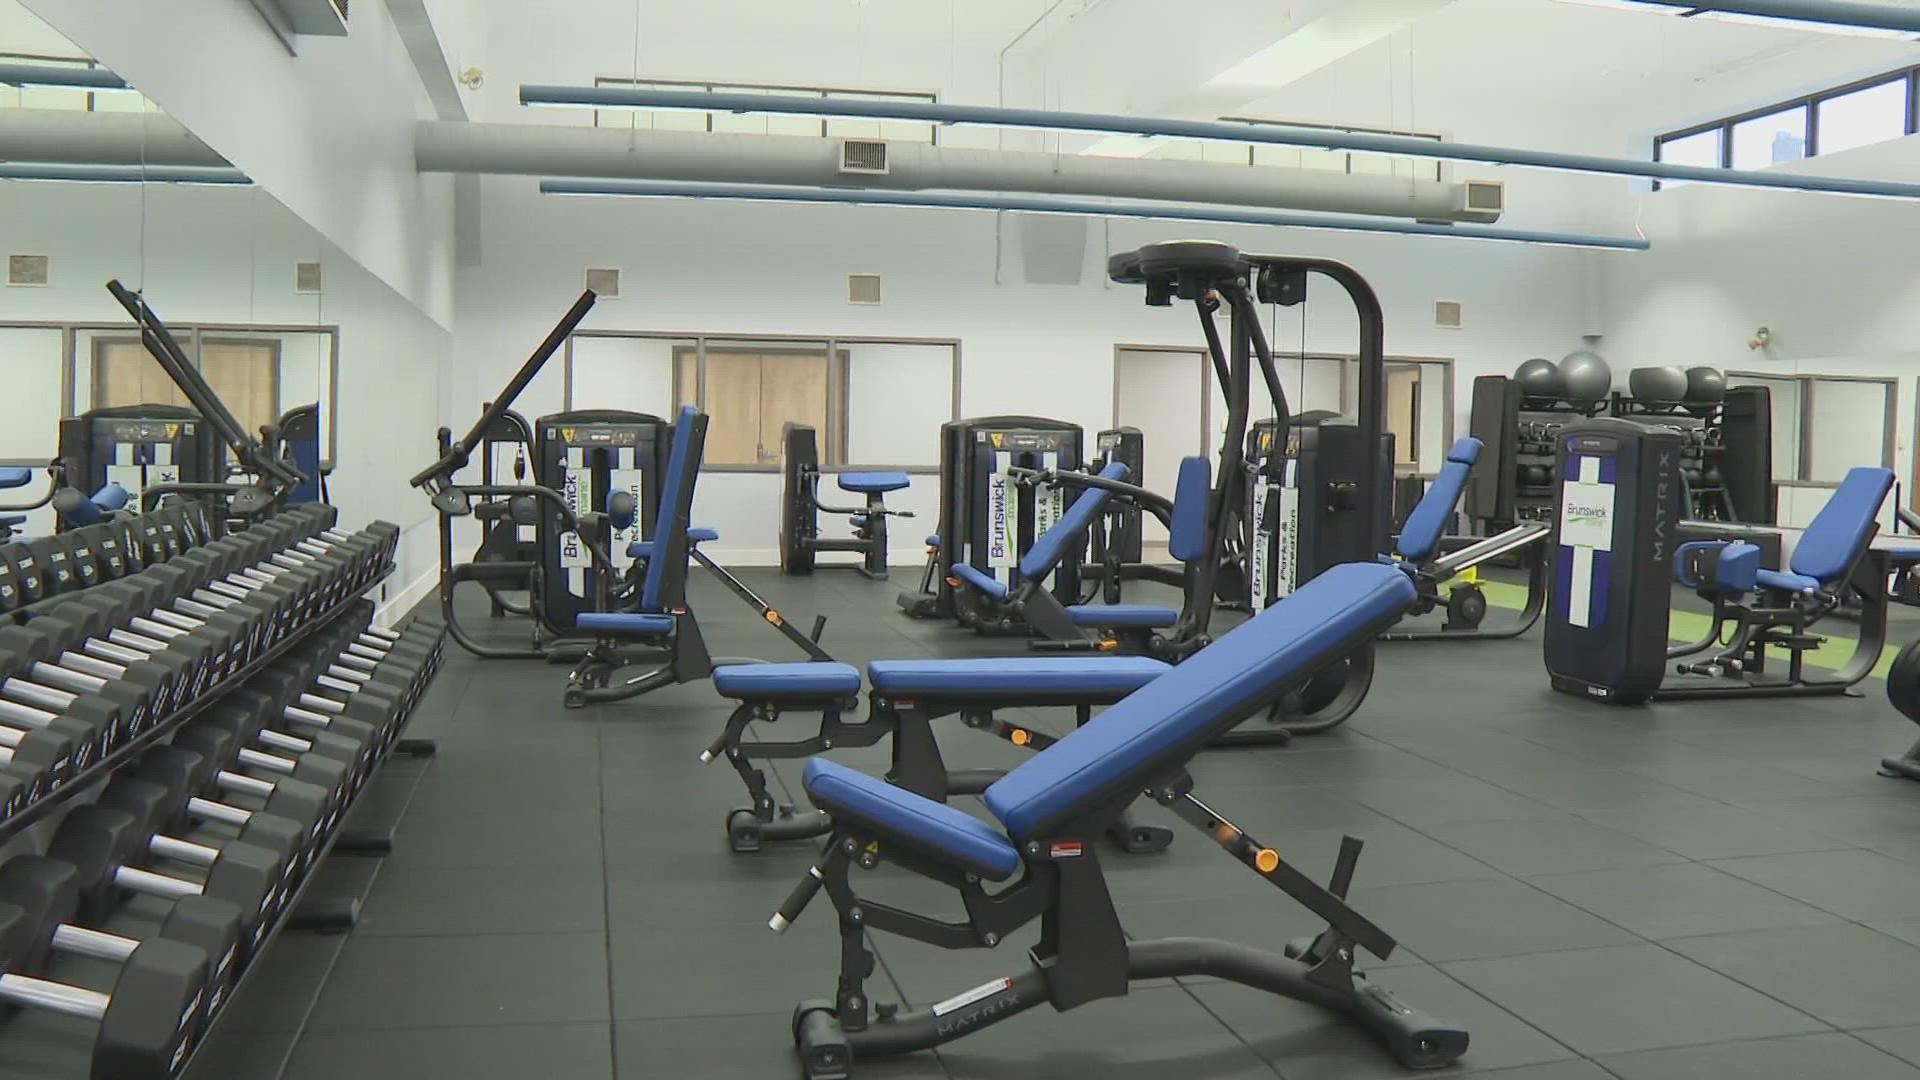 Brunswick Parks and Recreation will open its new fitness center on Nov. 1, and it will be free to use for the public.